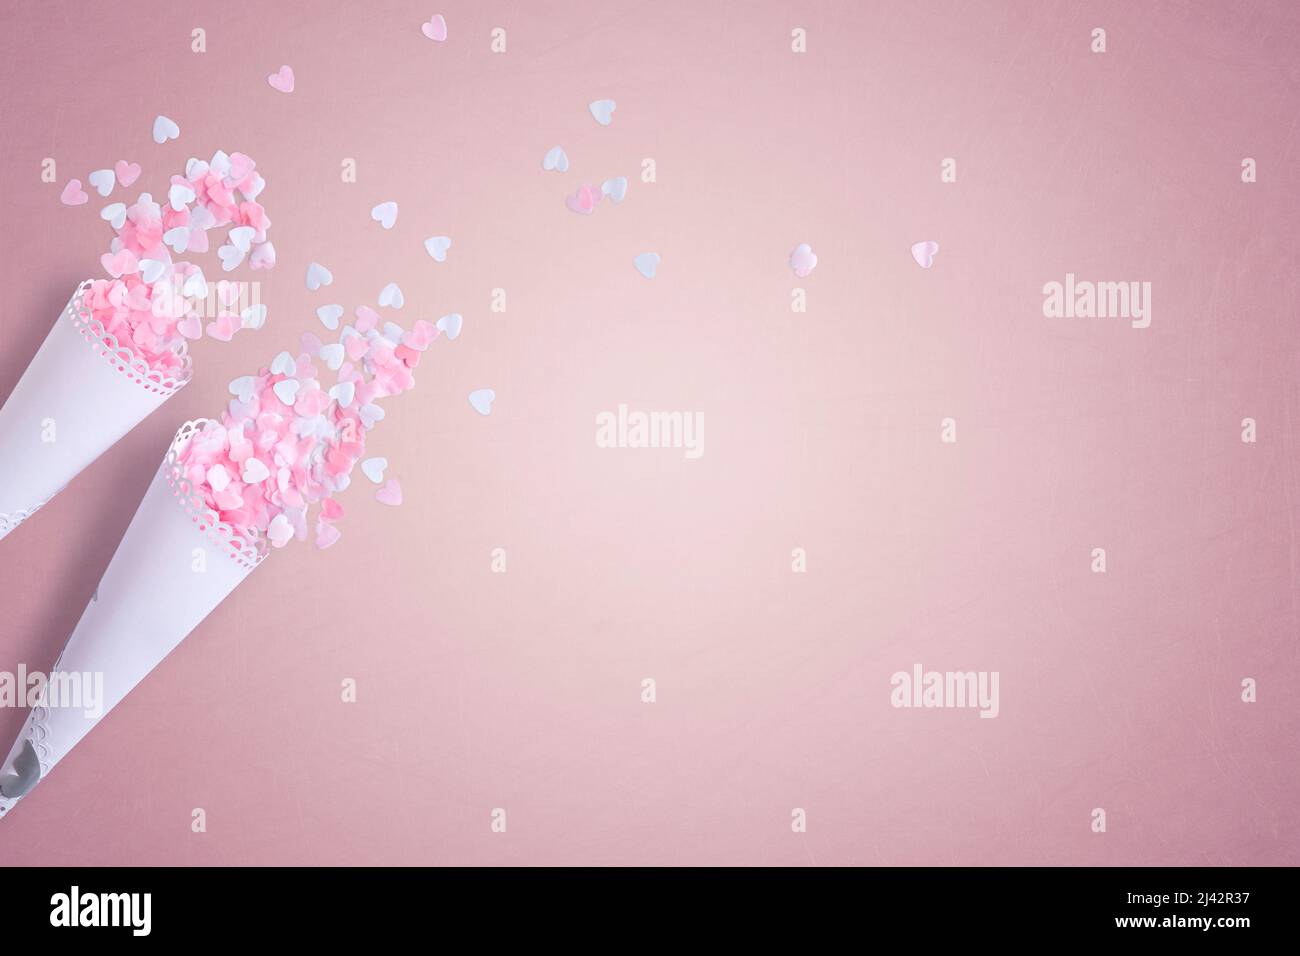 Biodegradable Wedding Confetti on a pink background with copy space Stock Photo